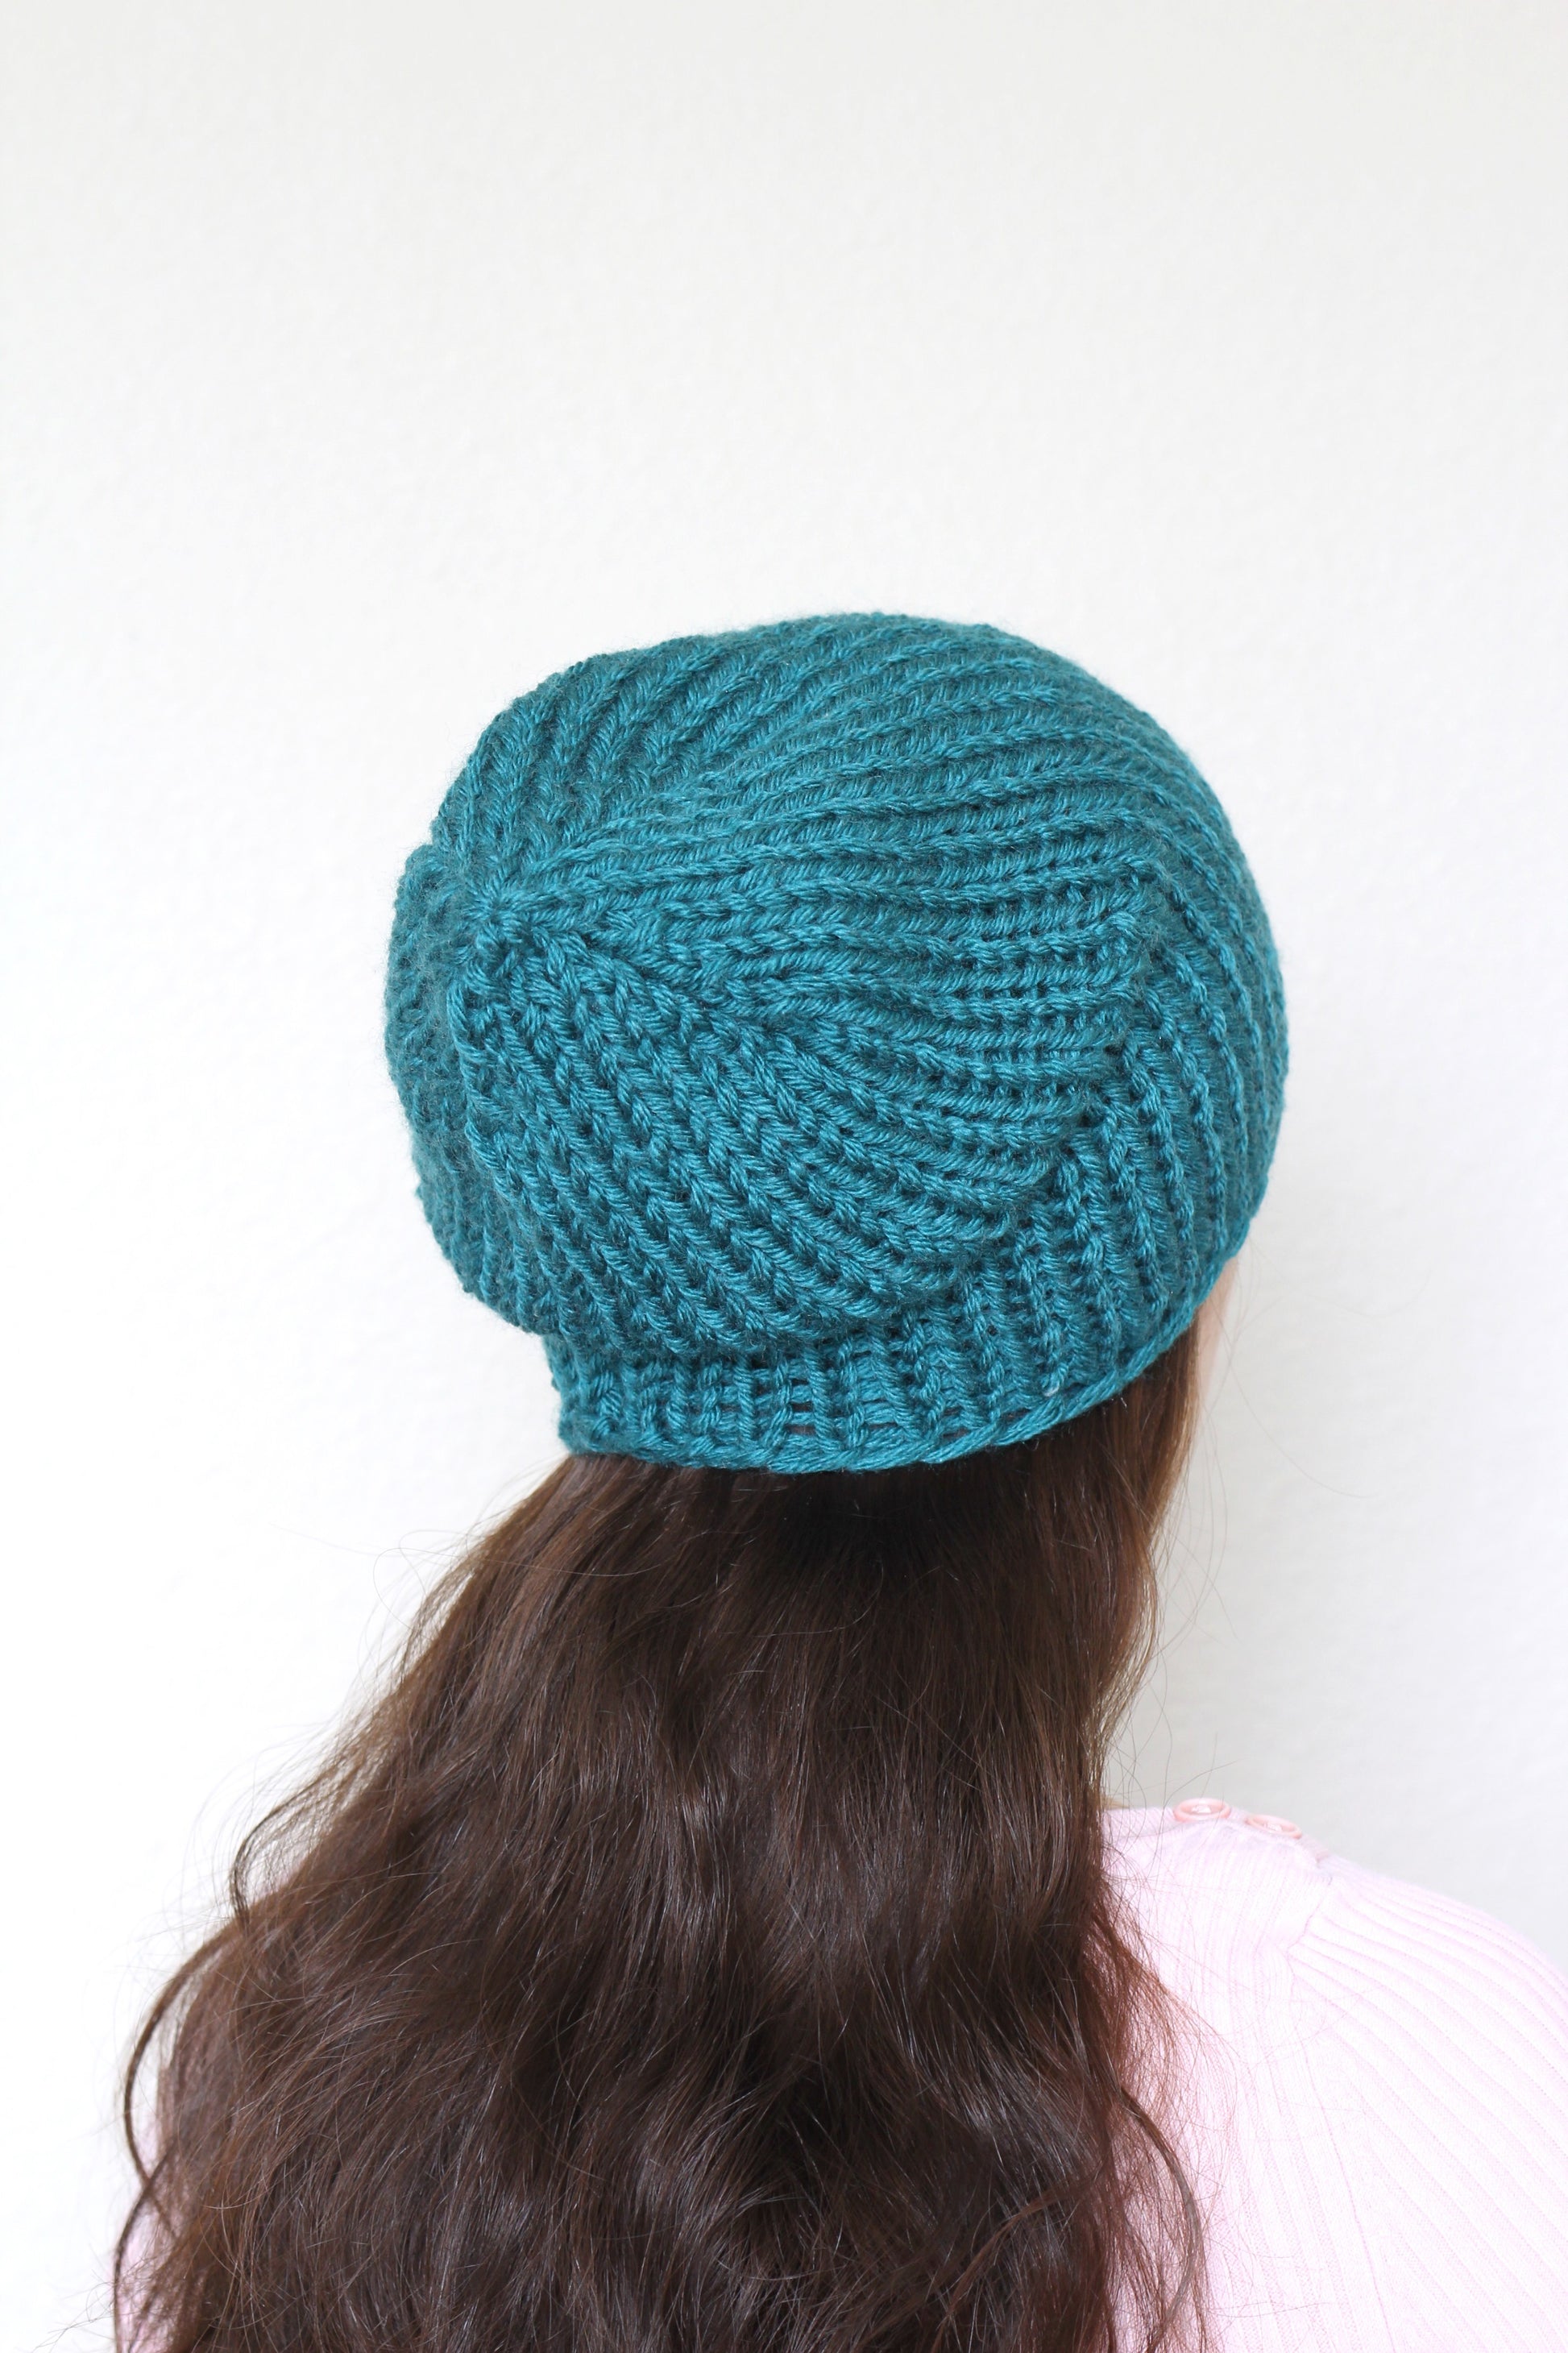 Beanie hat, knit hat, slouchy hat, knit beanie in olive green color